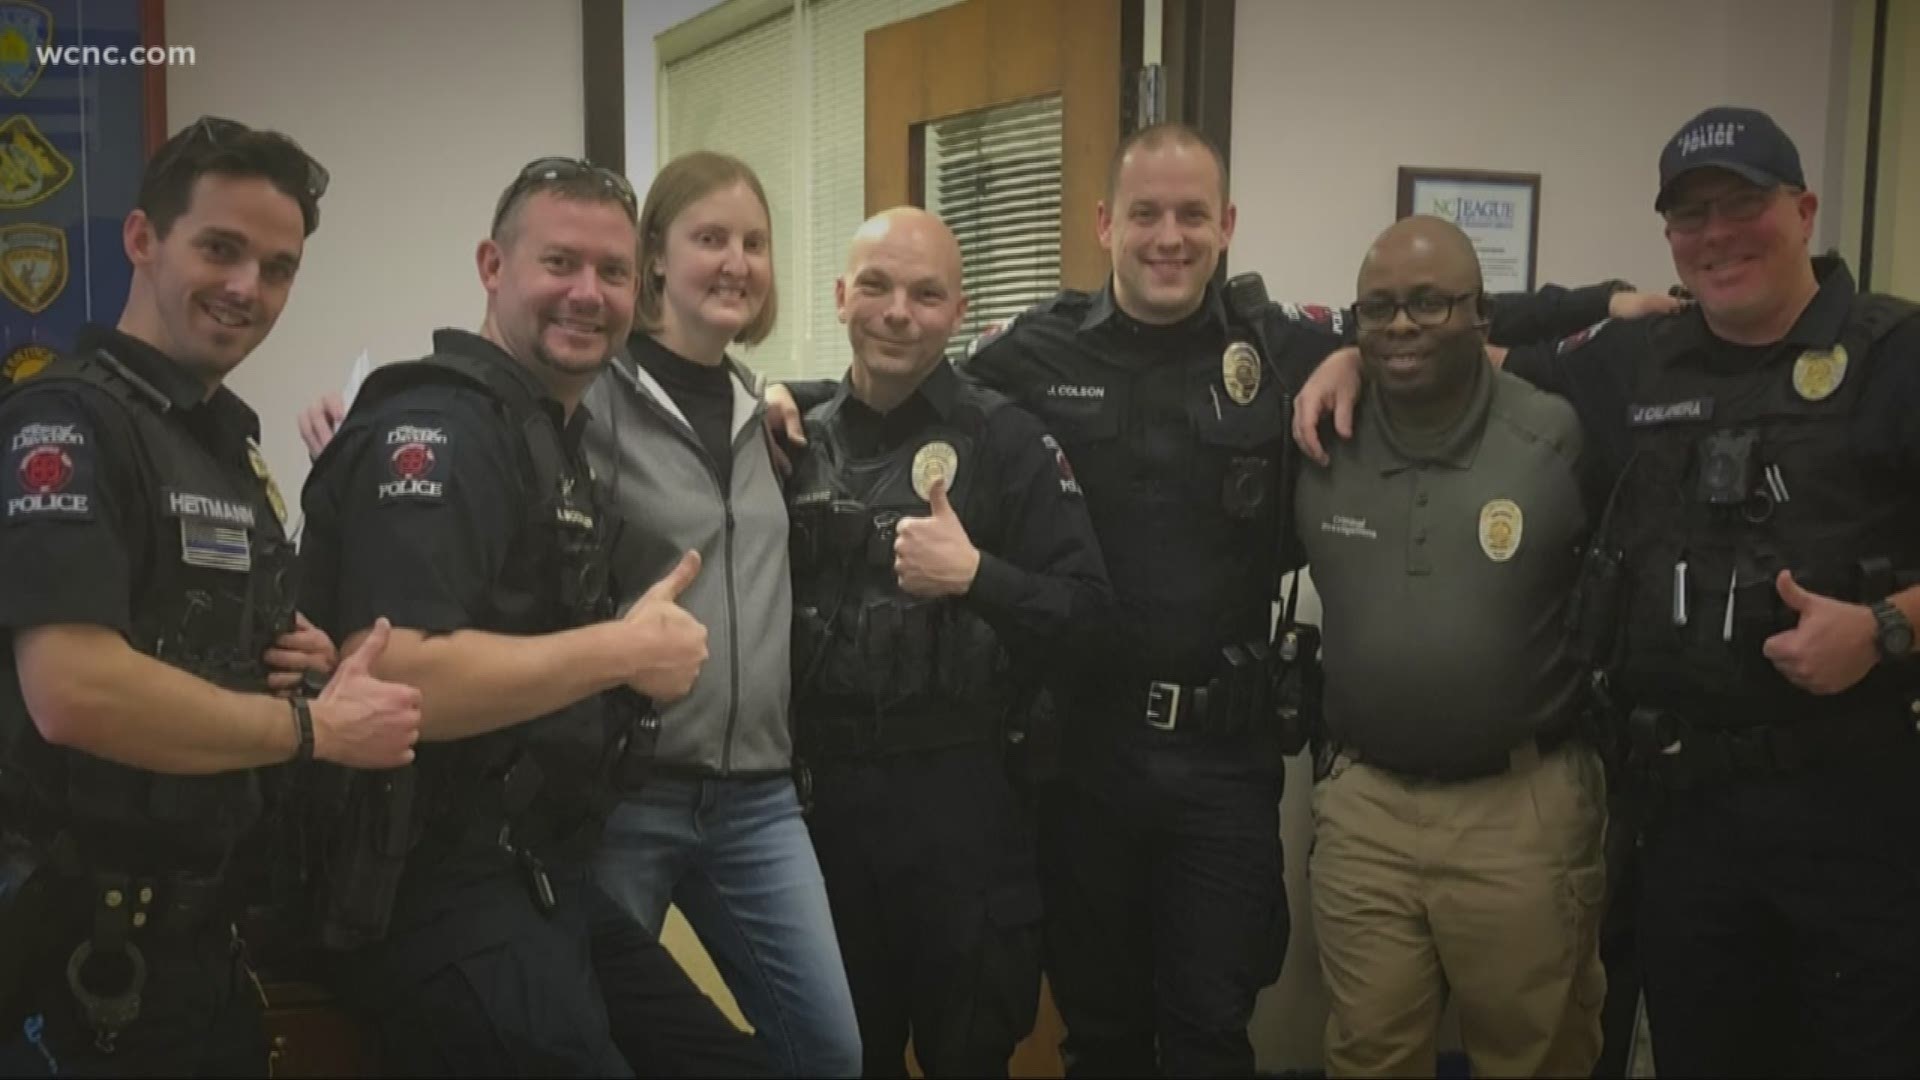 The Davidson community is rallying around a police officer who's been sidelined by a mysterious medical condition. Medical experts couldn't figure out what was wrong.